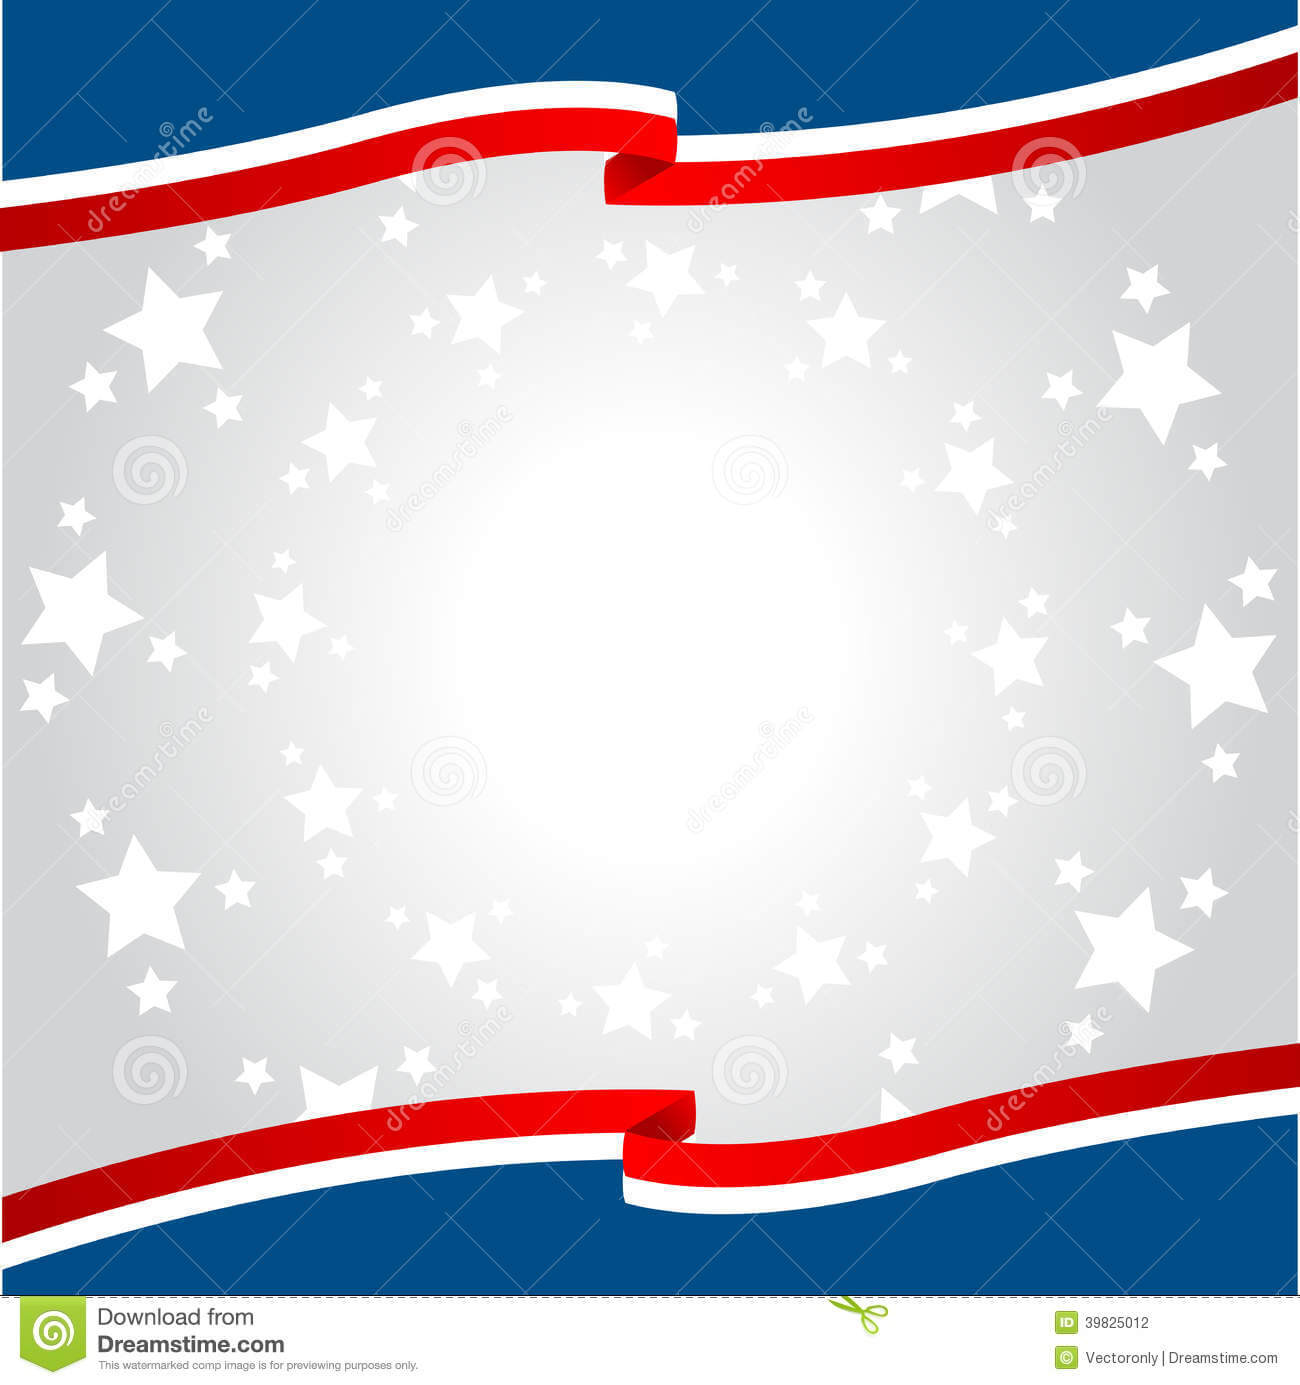 Patriotic Stock Vector Image 39825012 Quality Backgrounds Intended For Patriotic Powerpoint Template